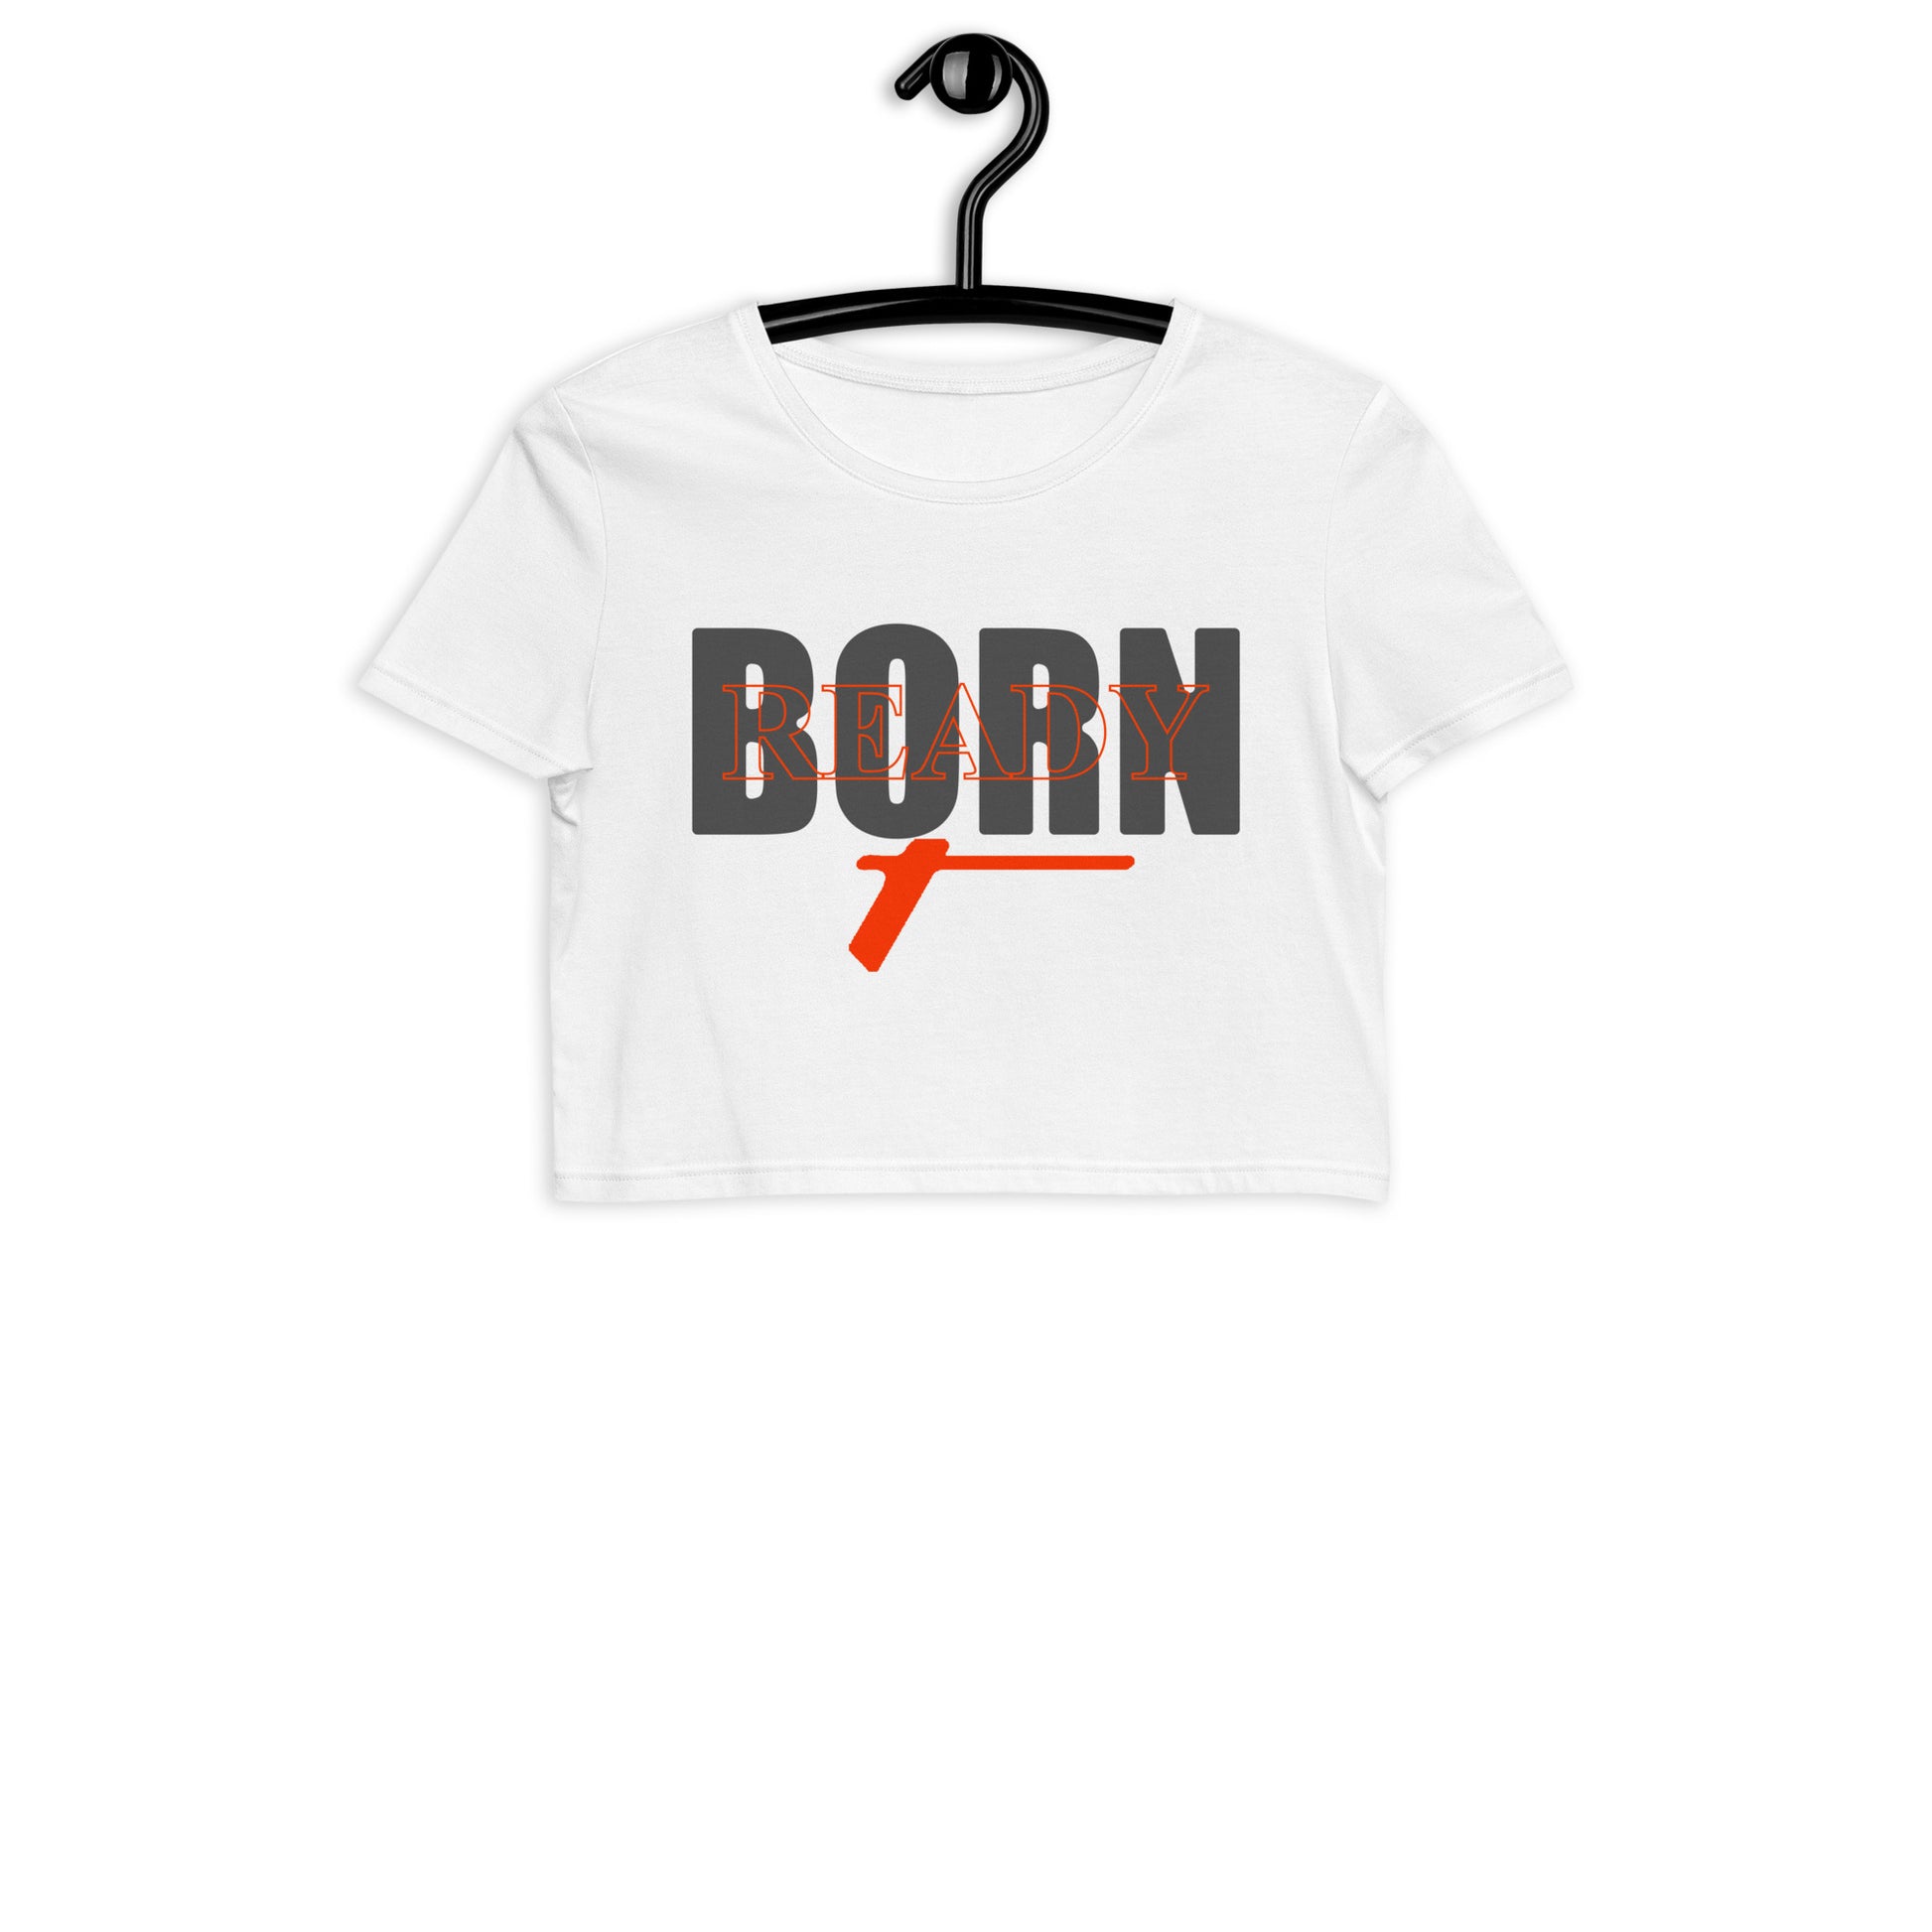 TRA "Born Ready" Organic Crop Top - Trained Ready Armed Apparel